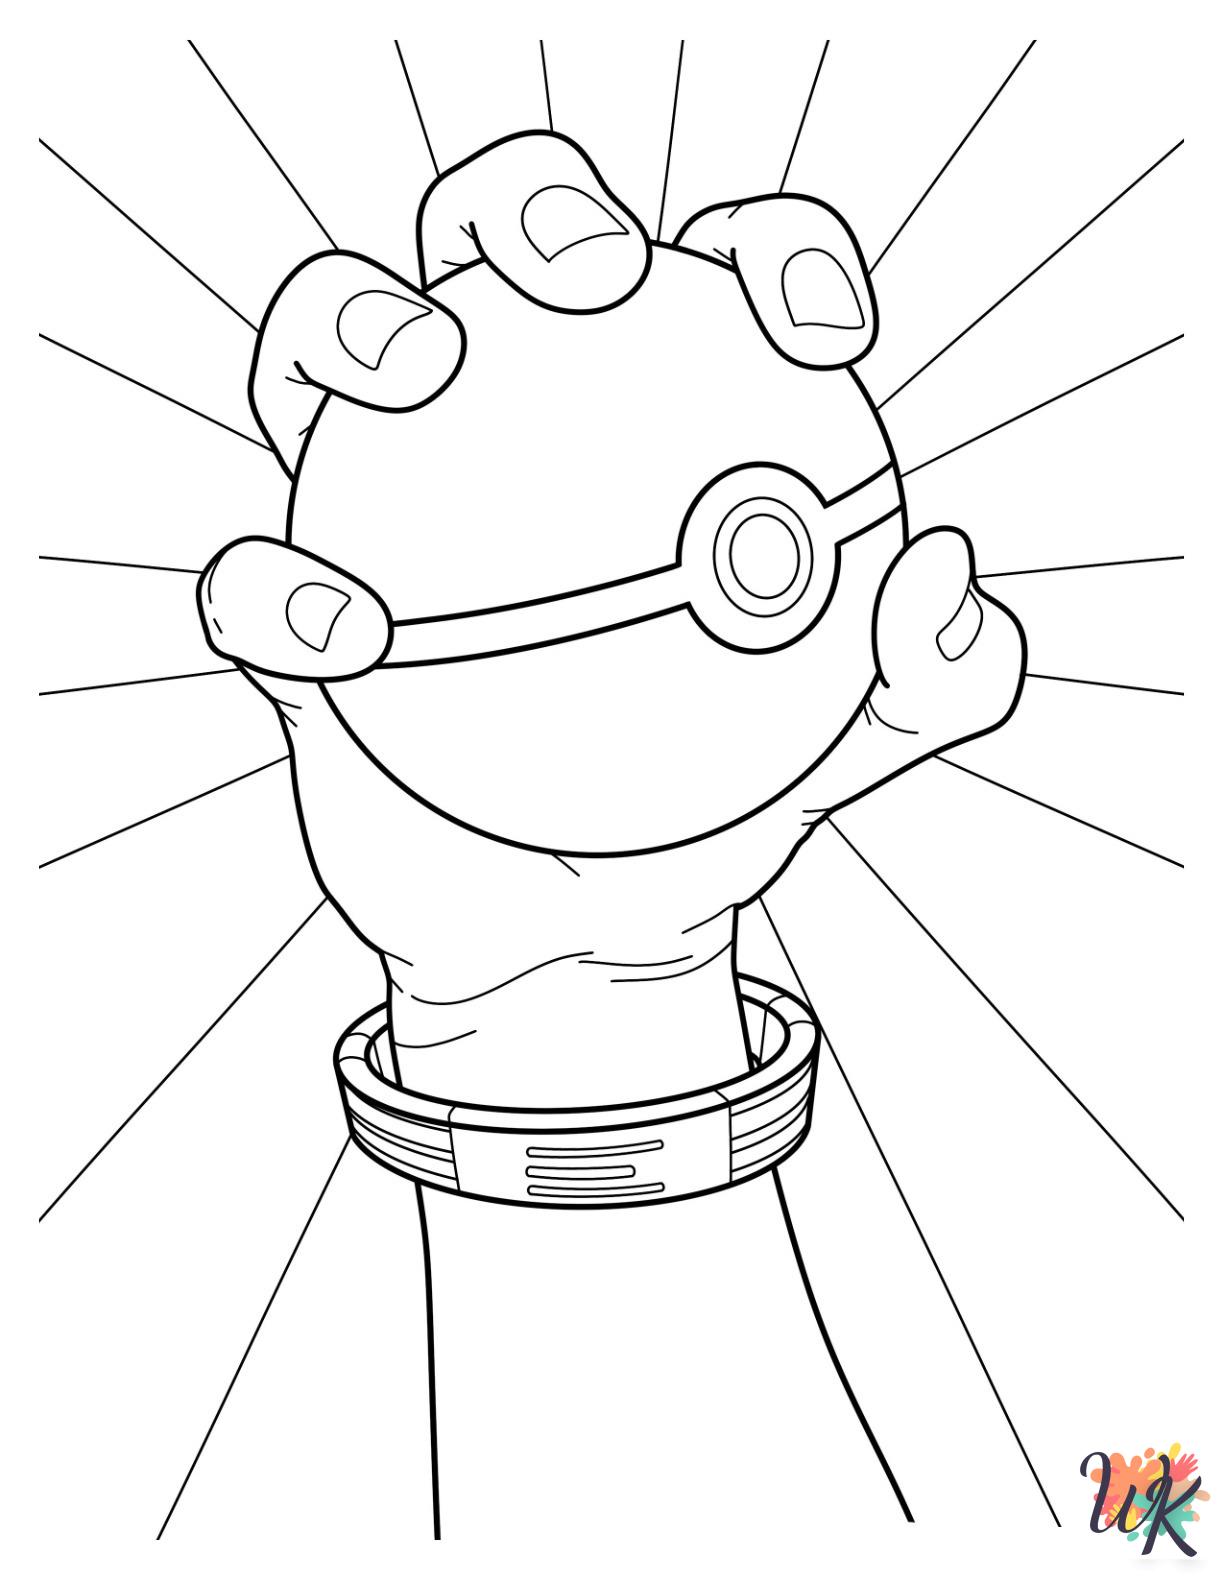 Pokeball adult coloring pages